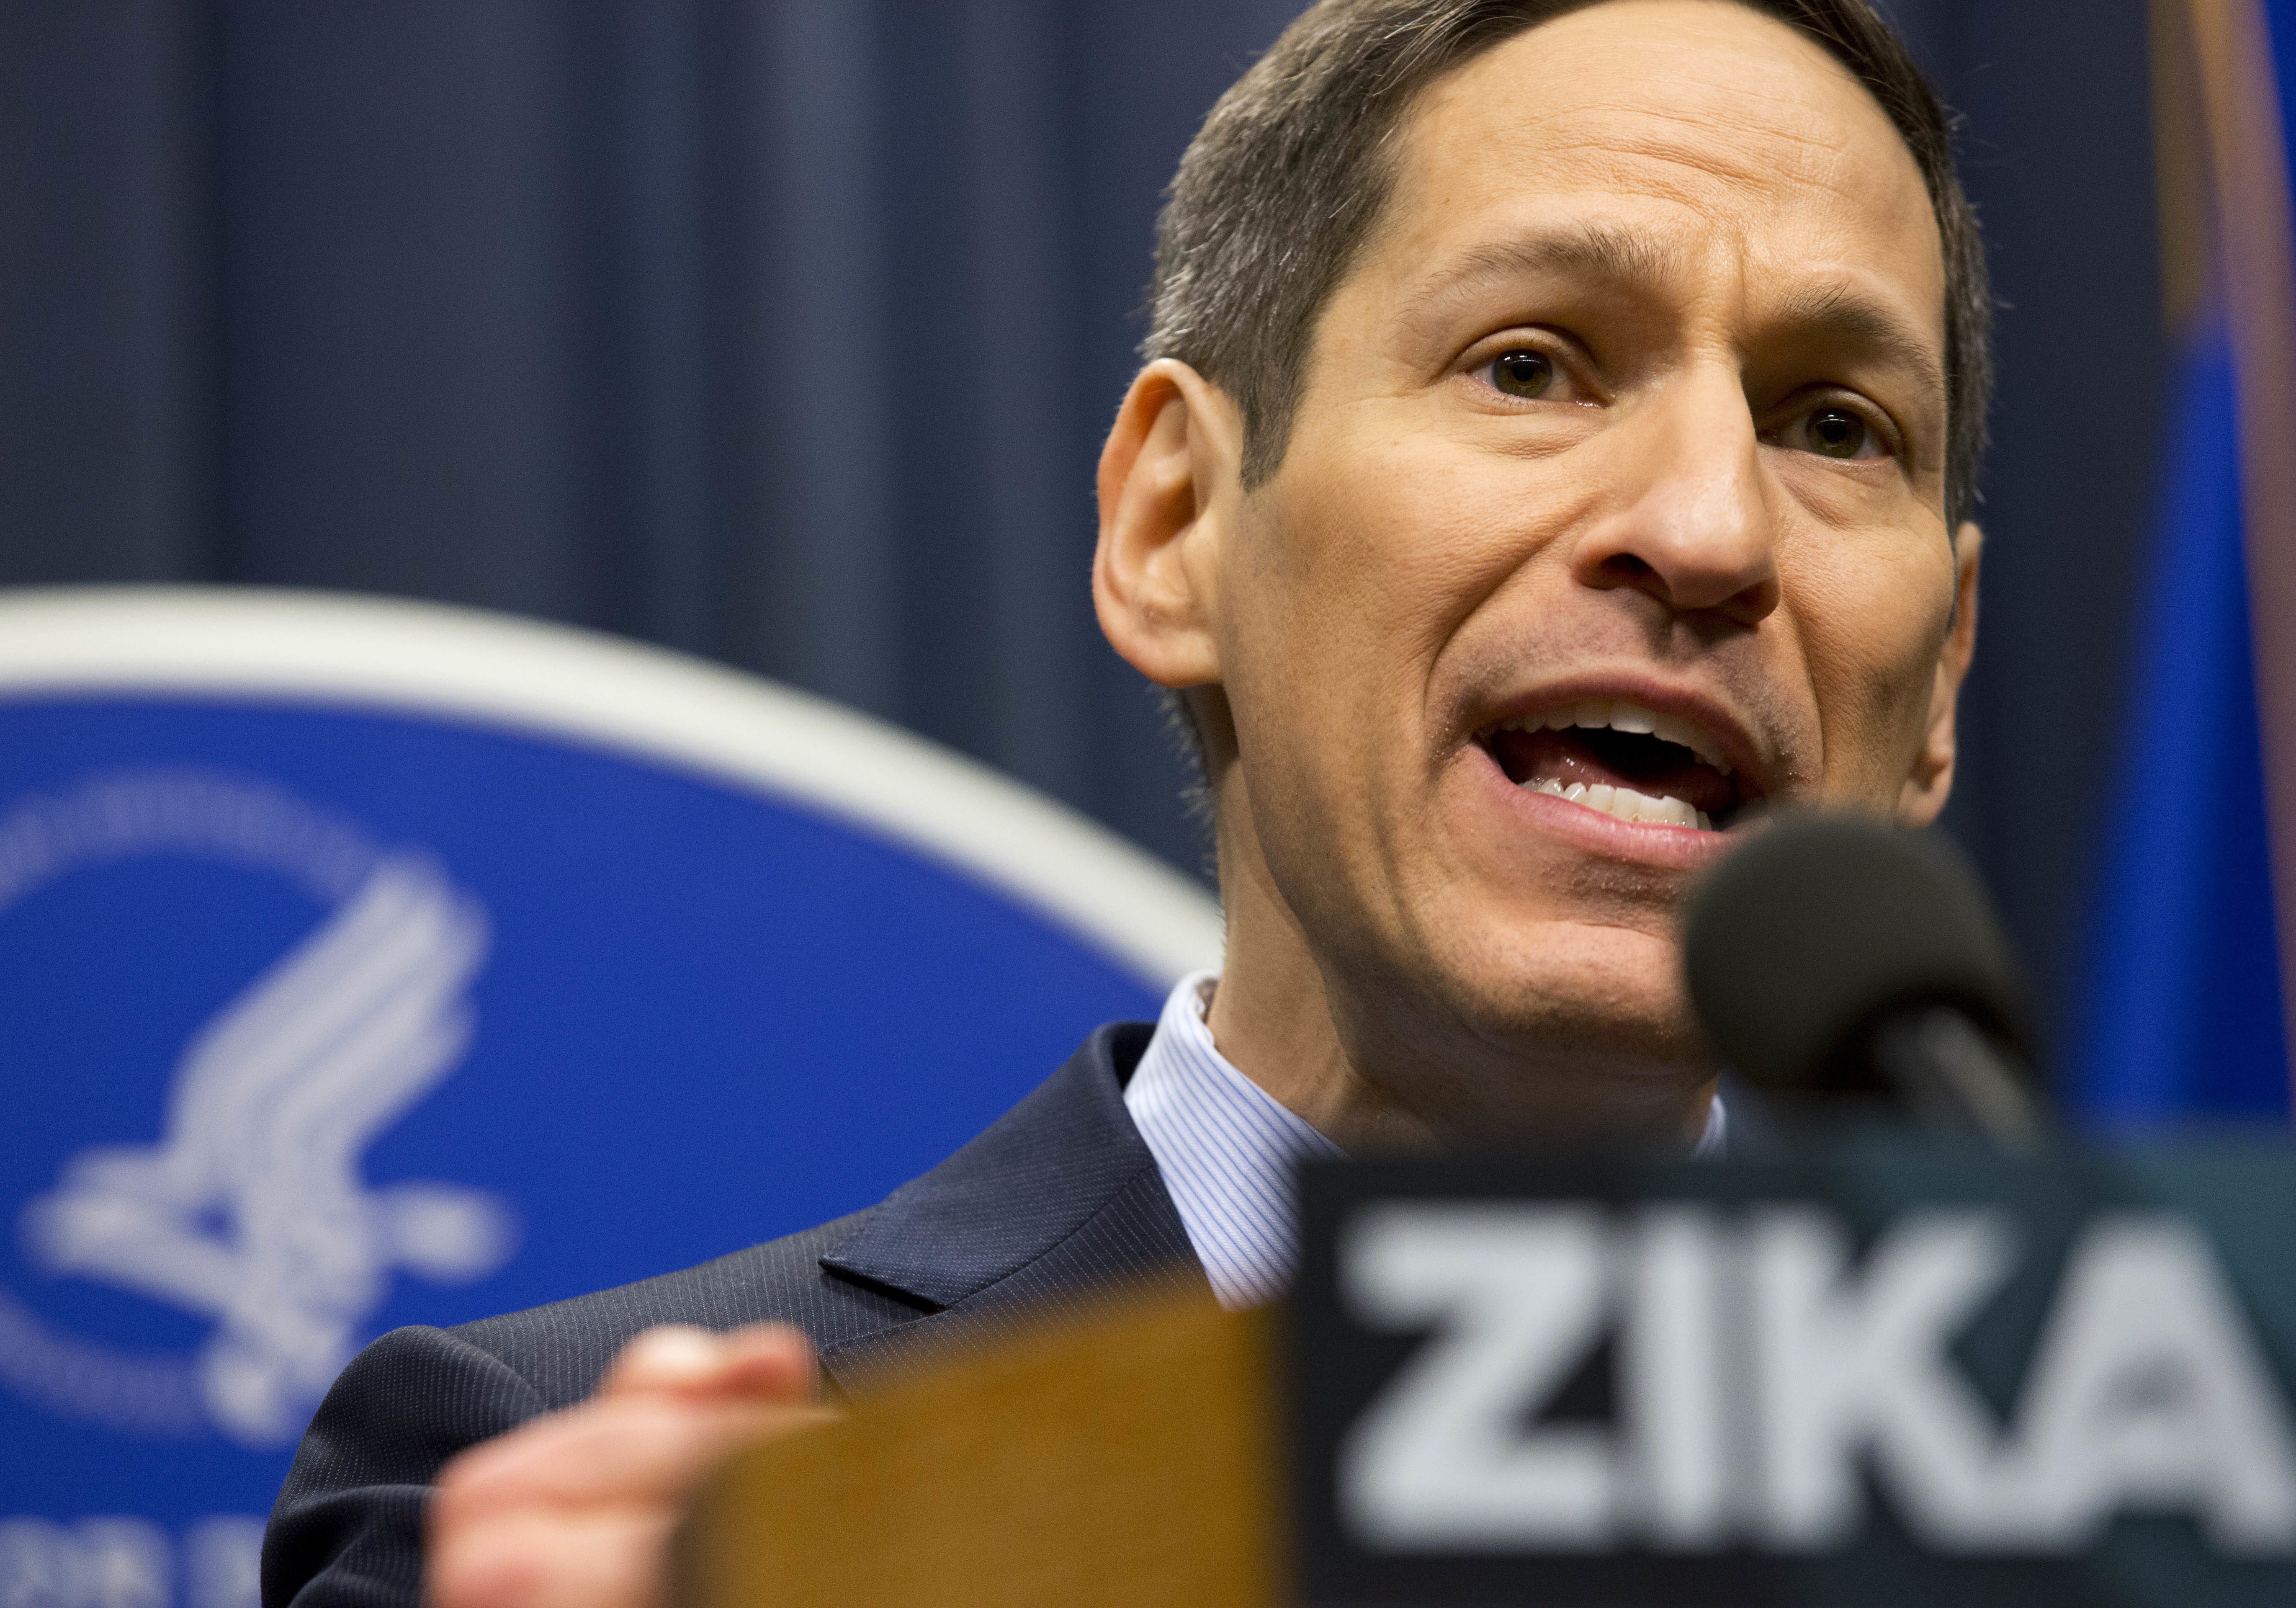 Centers for Disease Control and Prevention Director Dr. Thomas Frieden speaks during a press conference at a one-day Zika summit Friday, April 1, 2016, in Atlanta. The government is urging health officials from around the country to prepare for potential outbreaks of the mosquito-borne virus in the U.S.